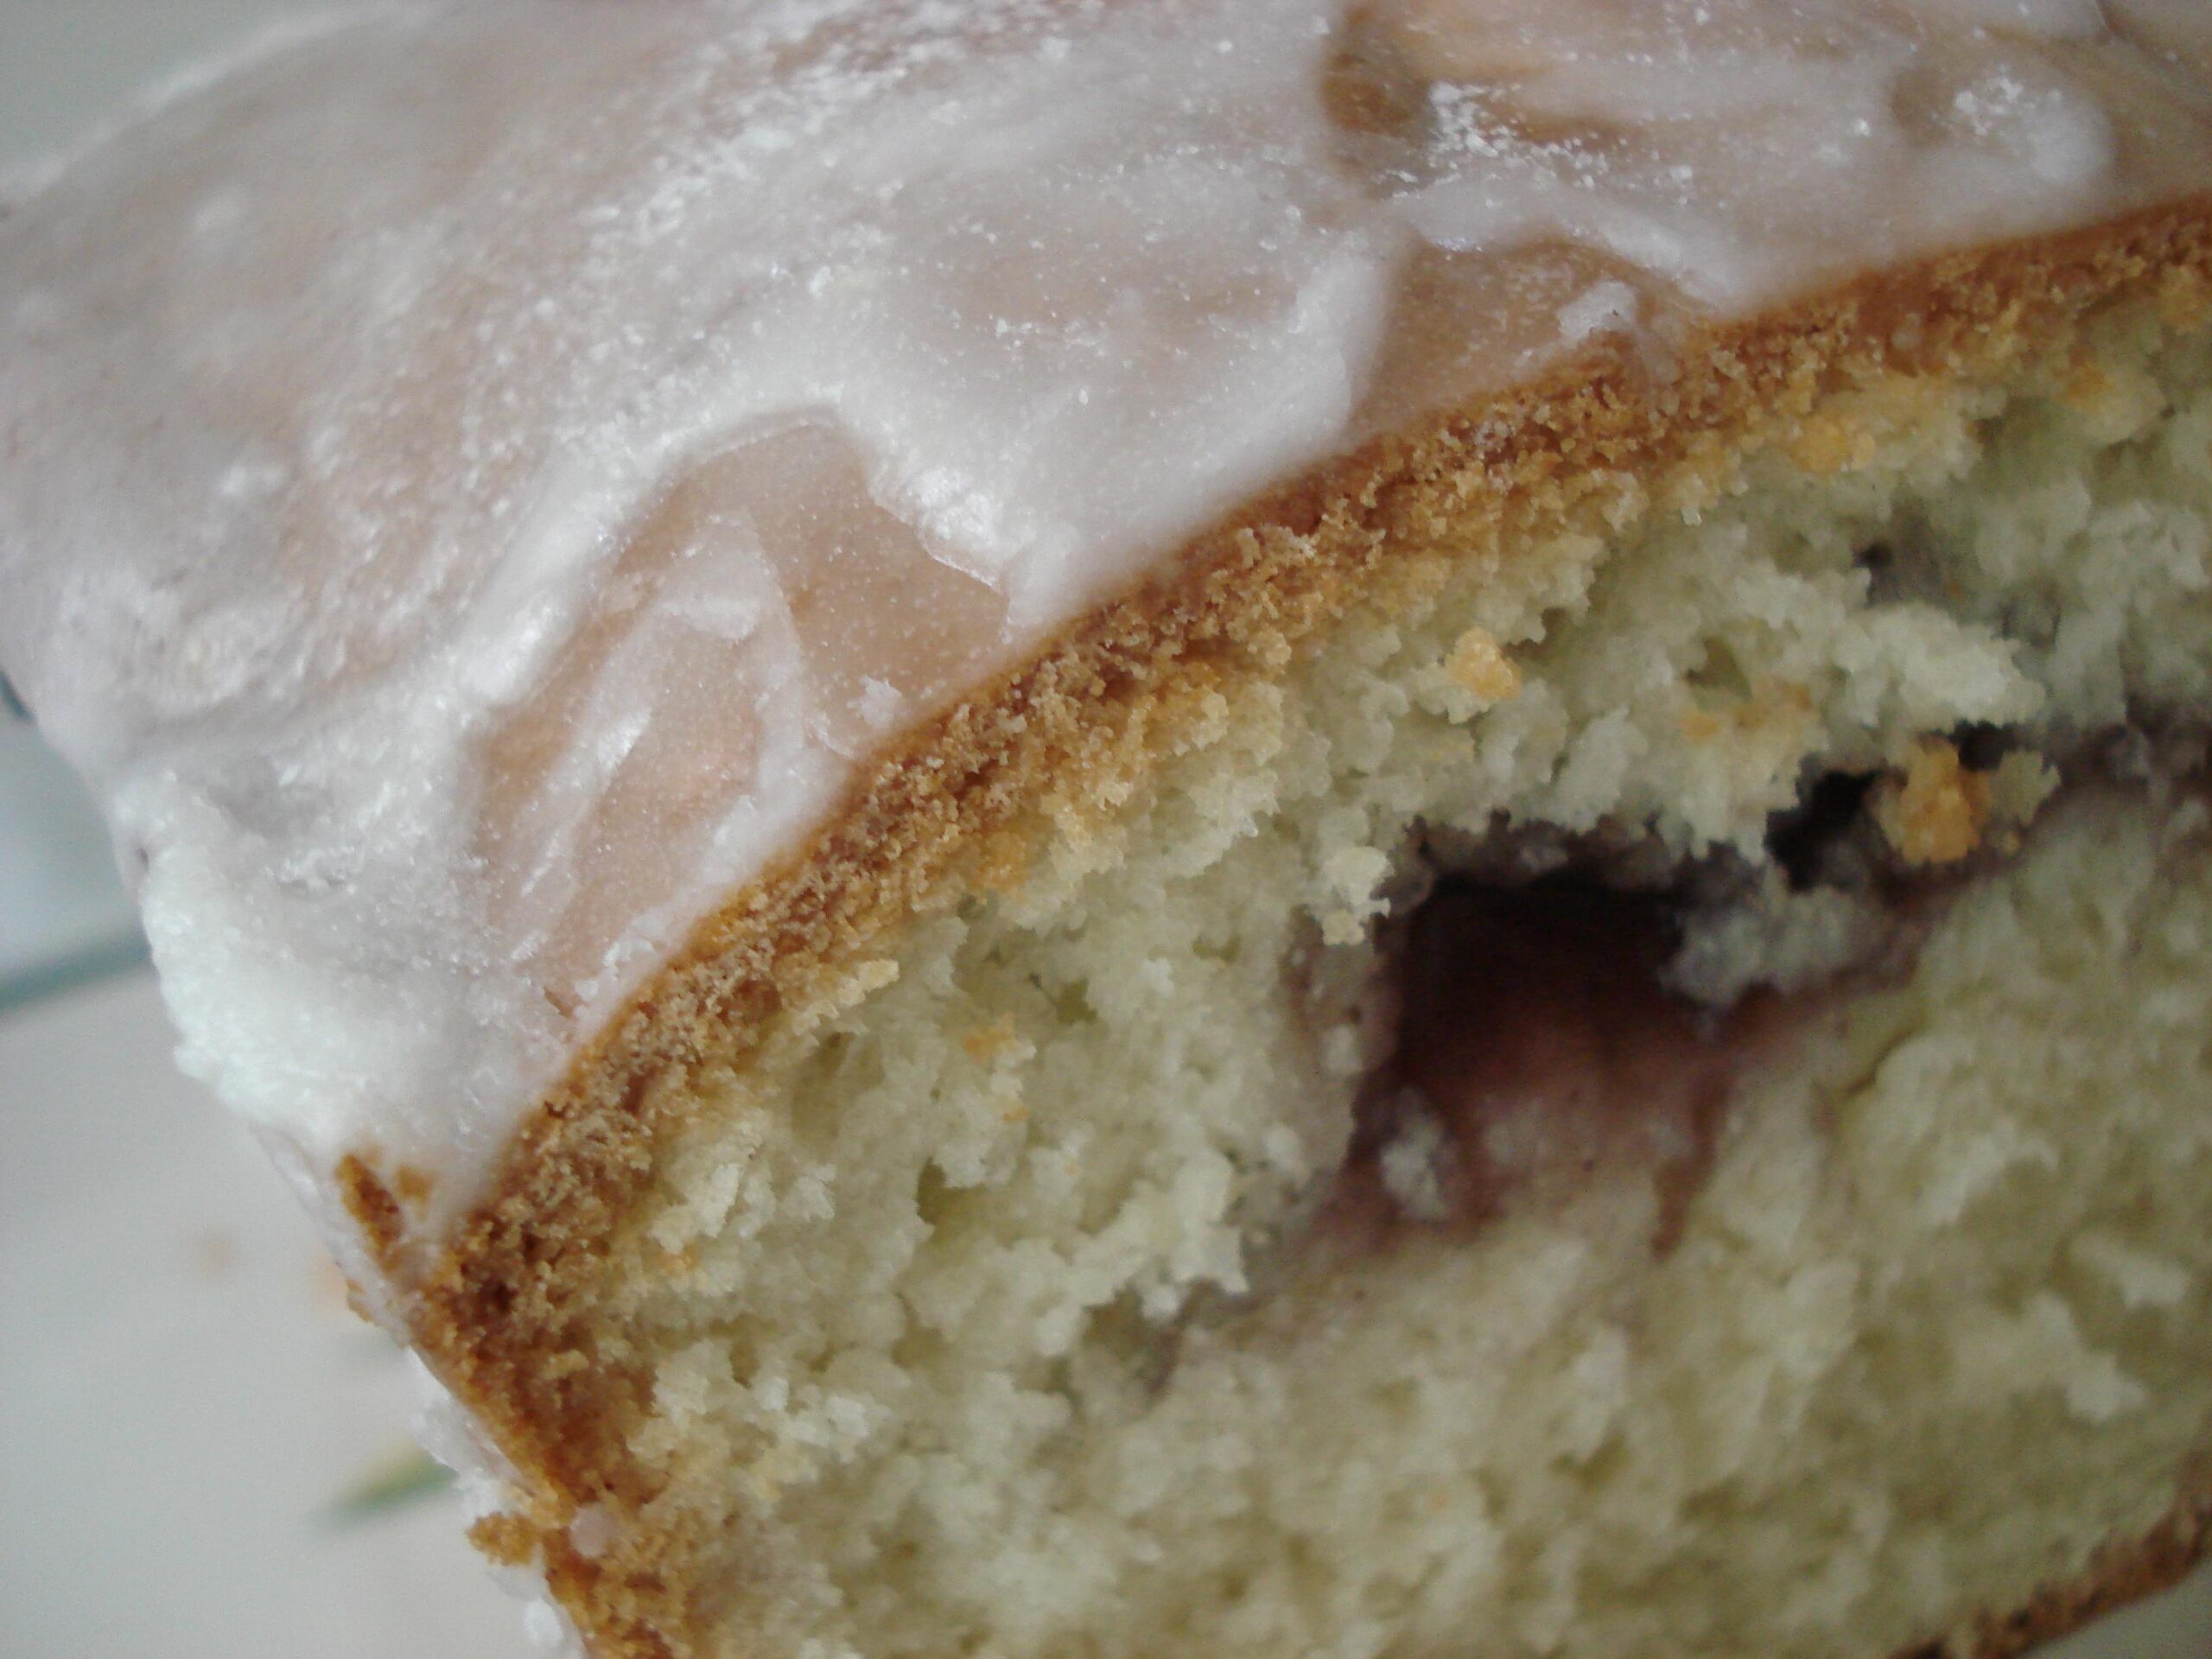  Our Blueberry Coffee Cake is the perfect start to your morning!